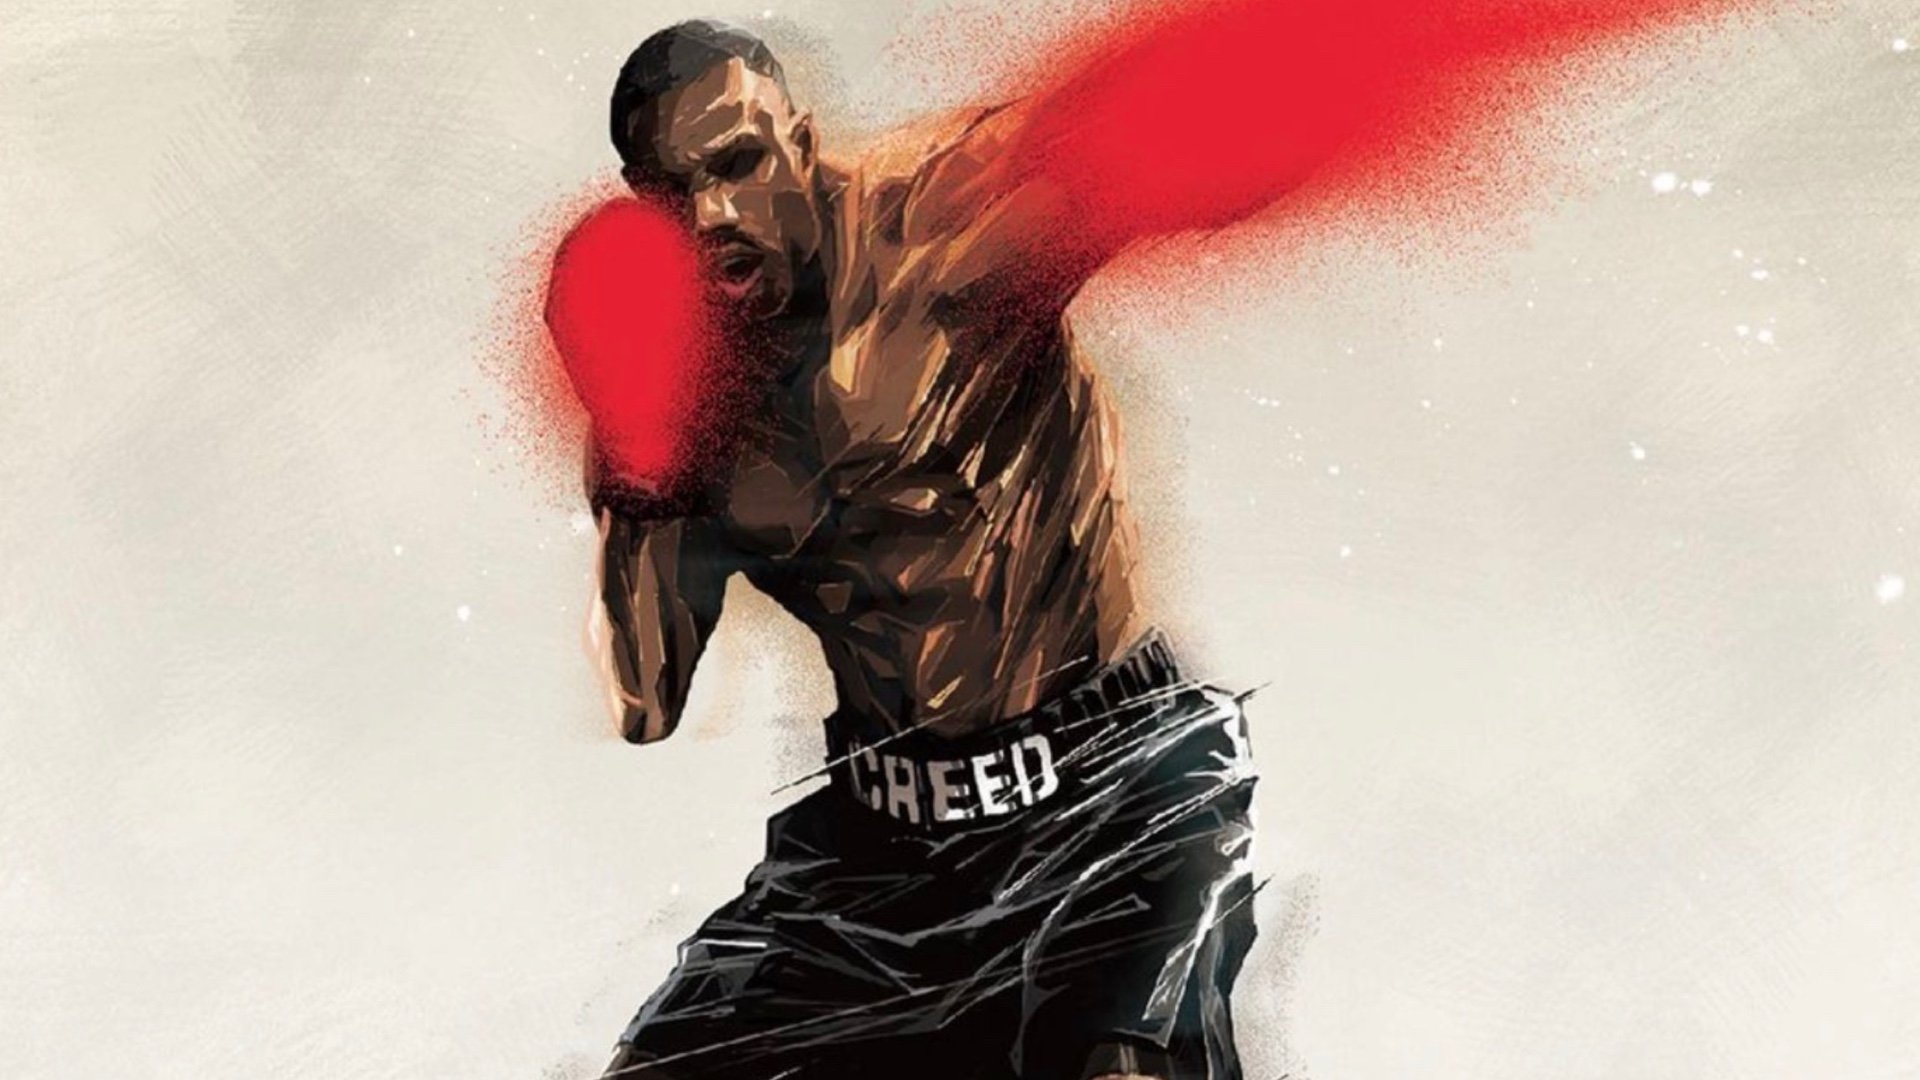 Michael B Jordan Was Inspired by Anime While Making Creed 3